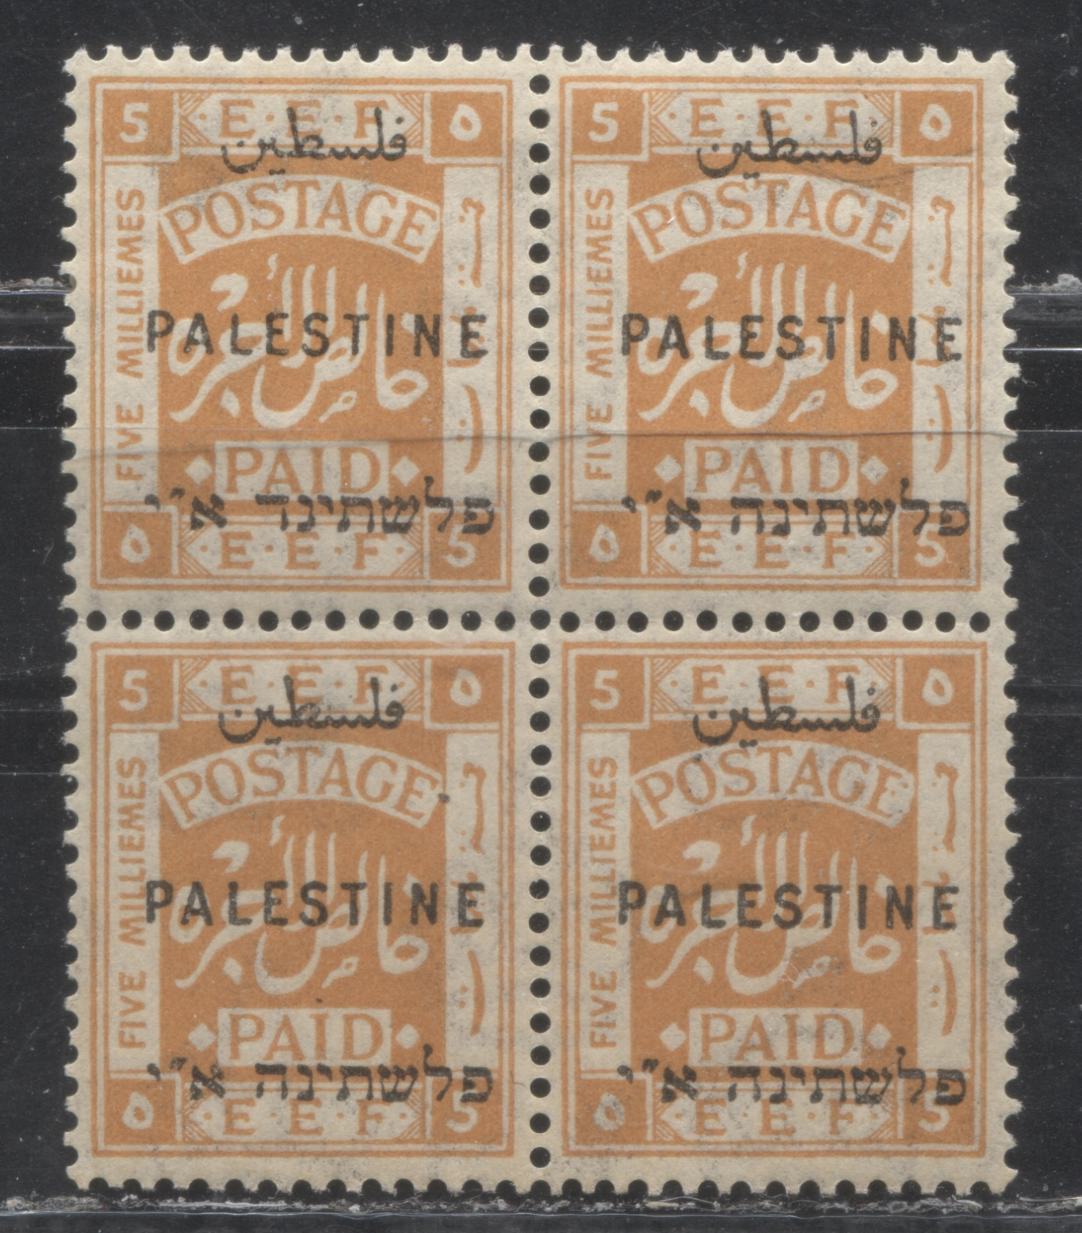 Lot 38 Palestine SG#75 5m Orange "Postage Paid" and "E.E.F" in Frame, 1922 Second London Overprinted Issue, A VFOG & VFNH Block of 4, Dalet For Hey Variety From Positon 55, Overprint Types 2 and 3